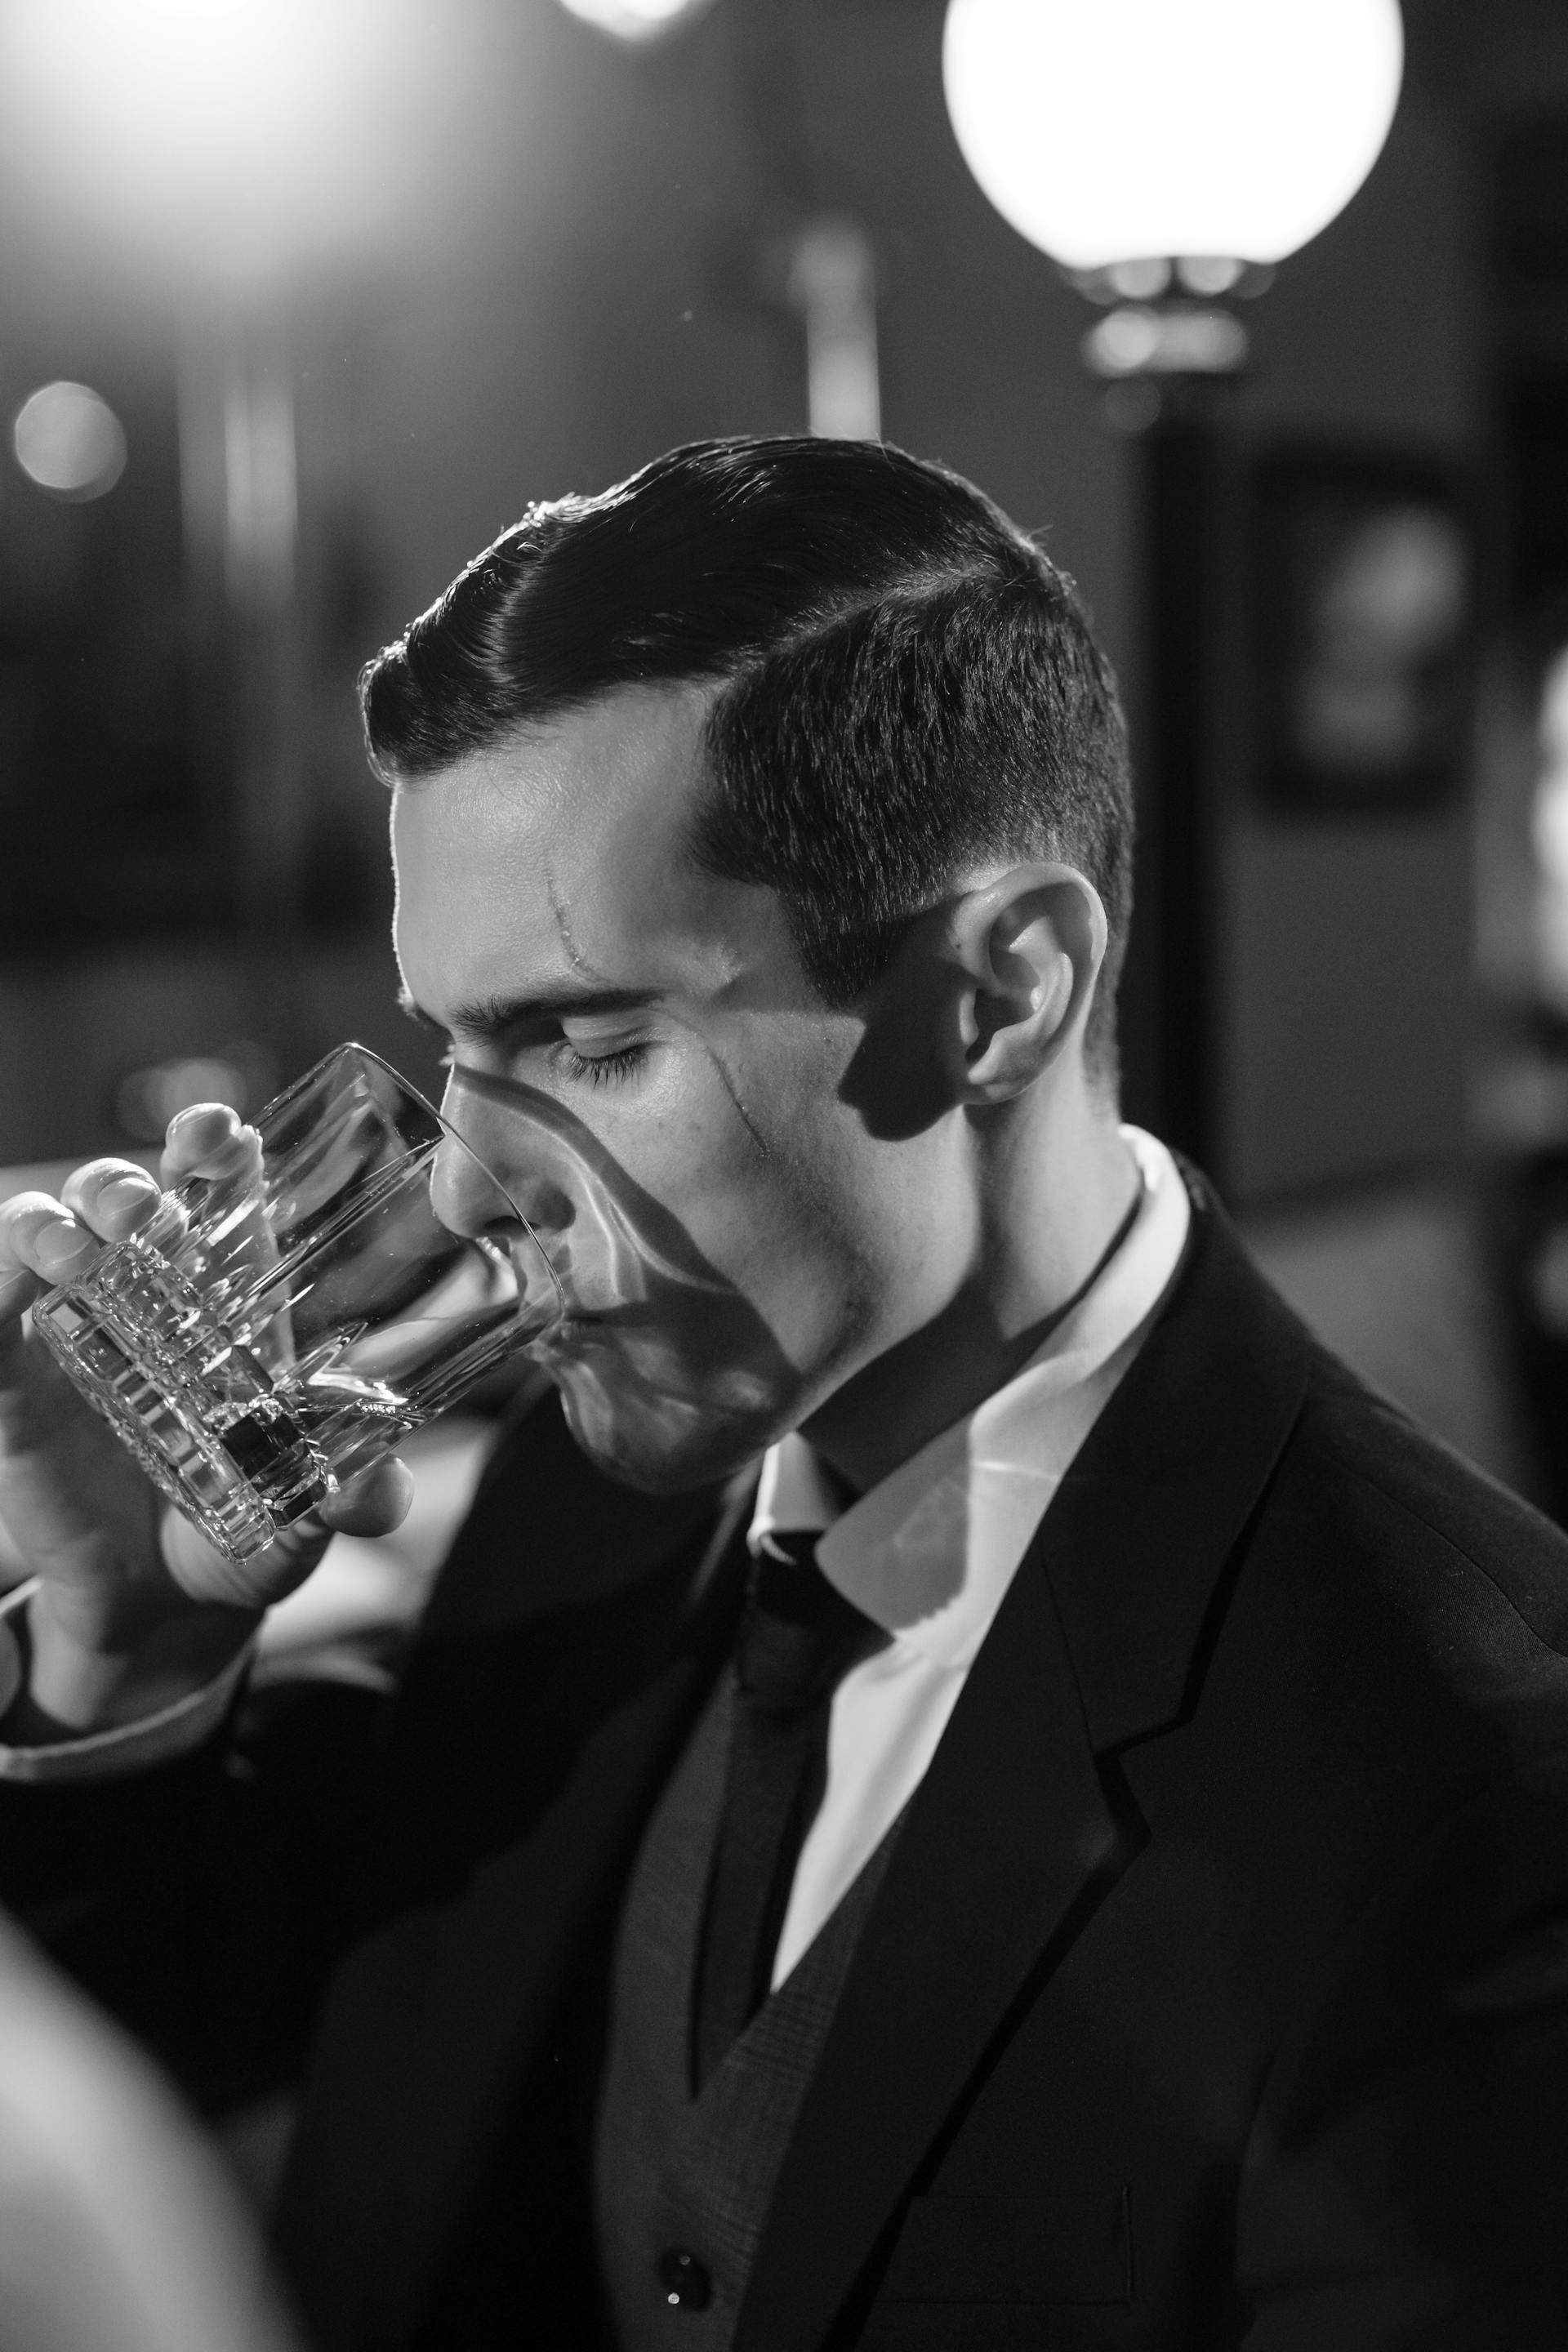 A mysterious man drinking whiskey | Source: Pexels